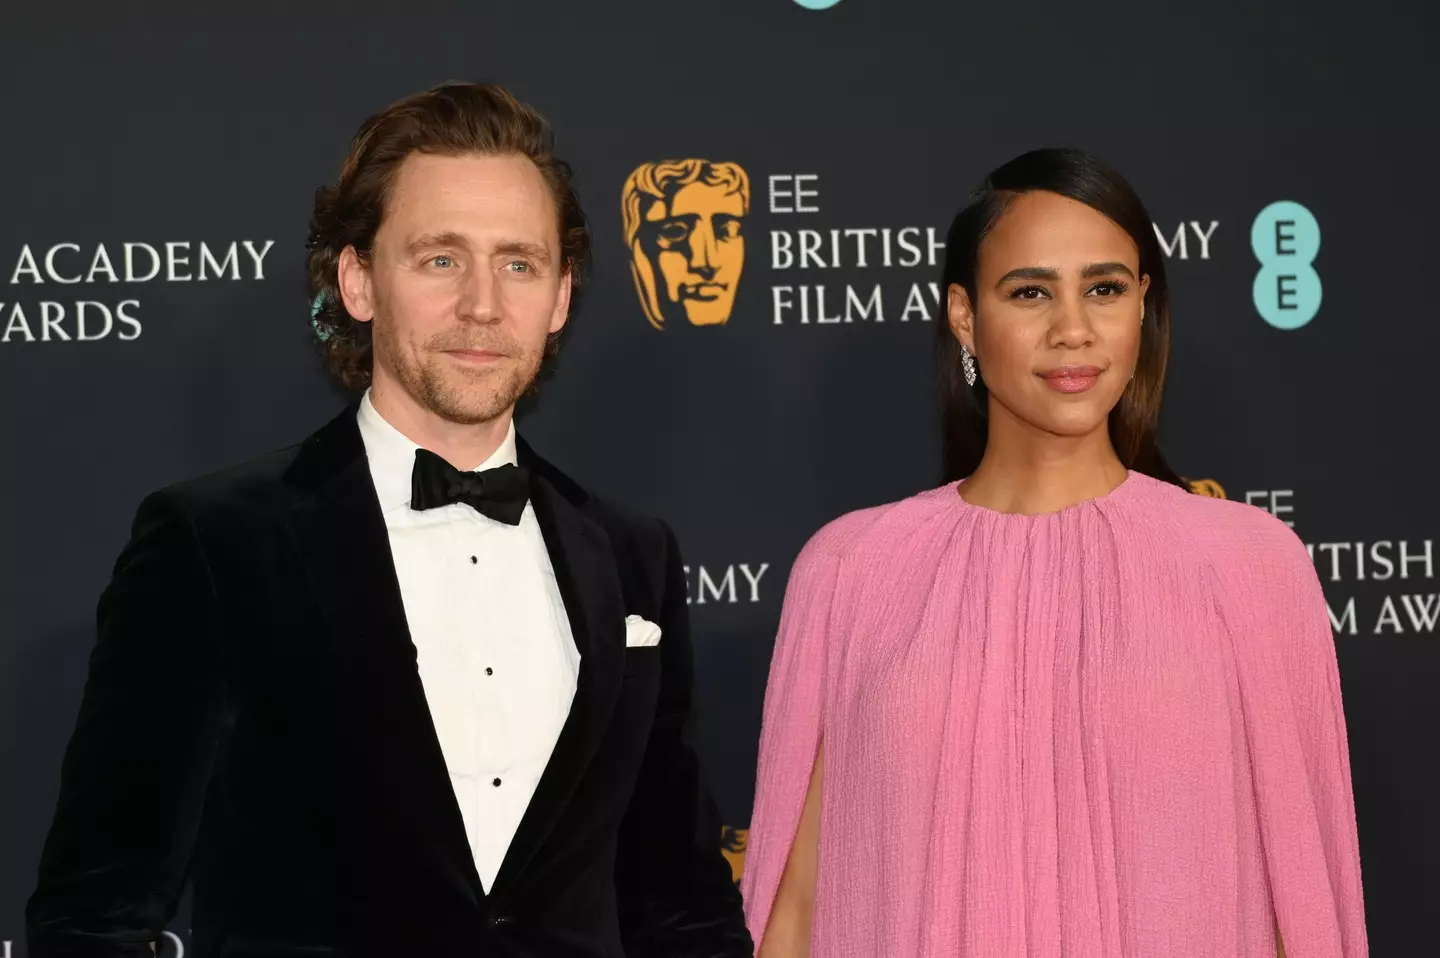 Zawe Ashton and Tom Hiddleston are reported as having welcomed their first child.